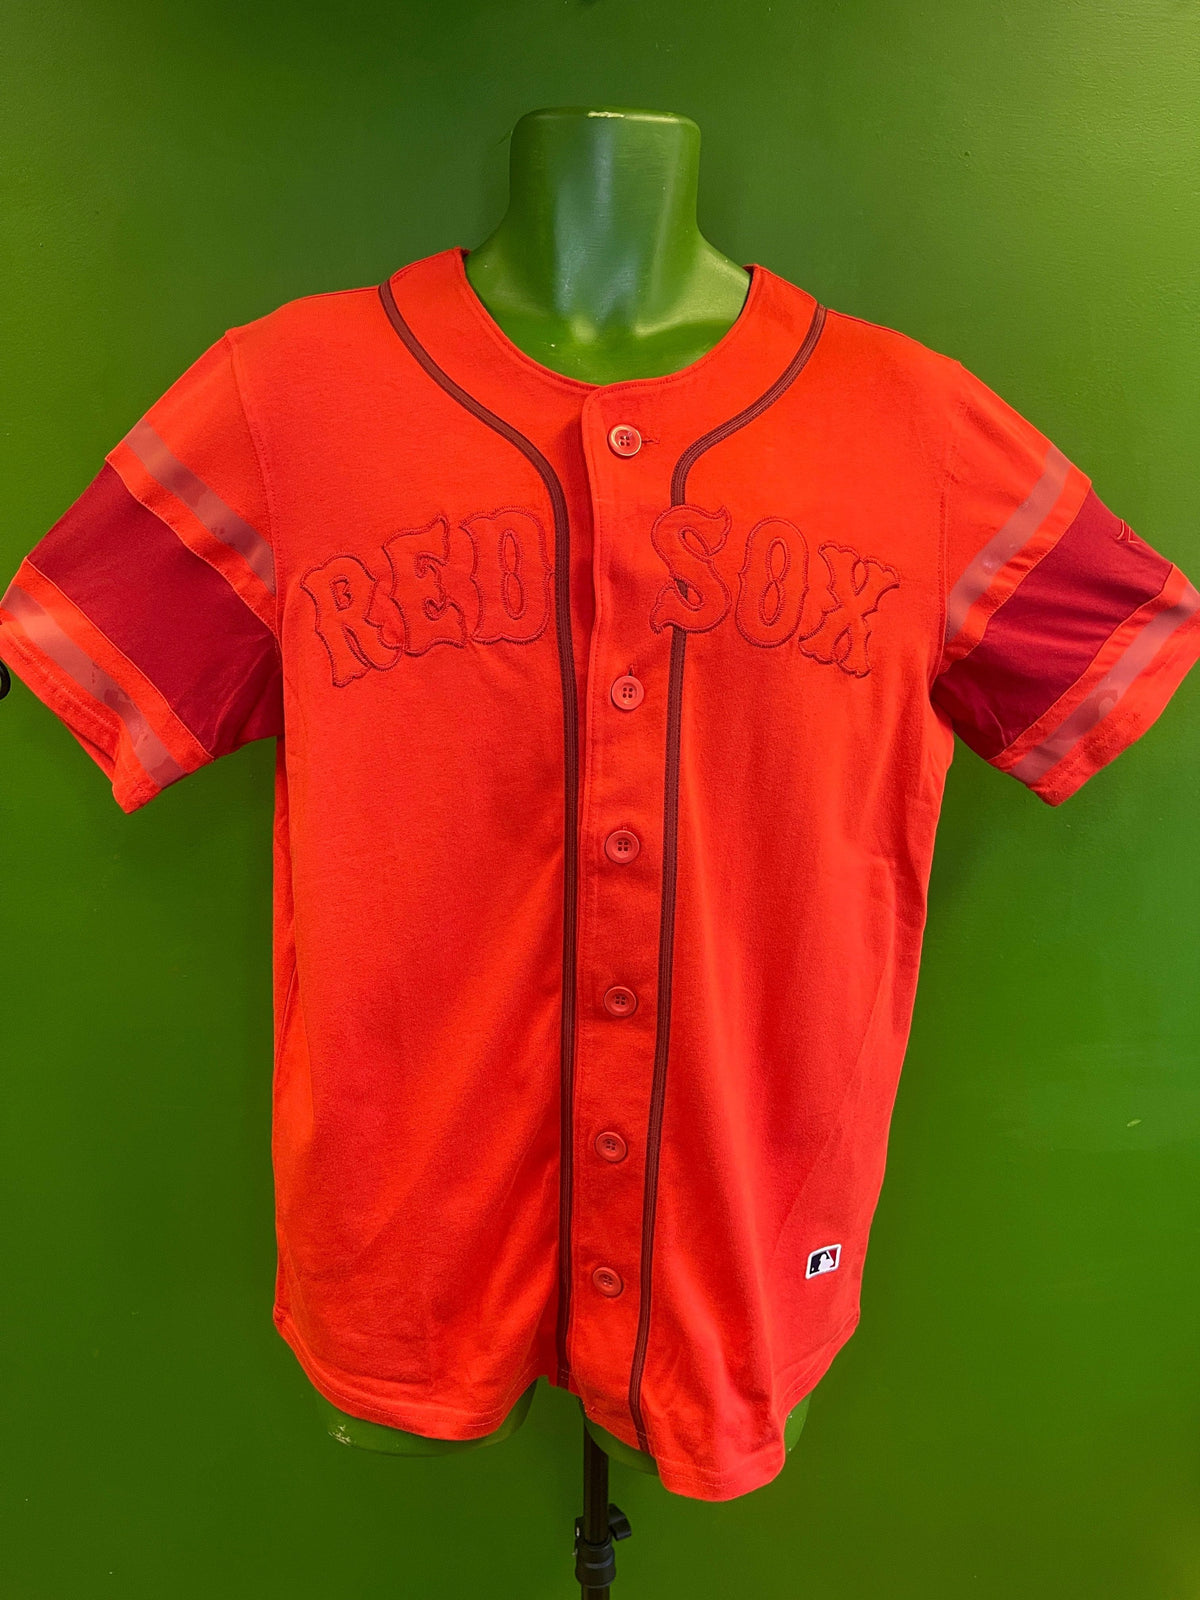 MLB Boston Red Sox Cotton Team Jersey Red on Red Men's Medium NWT